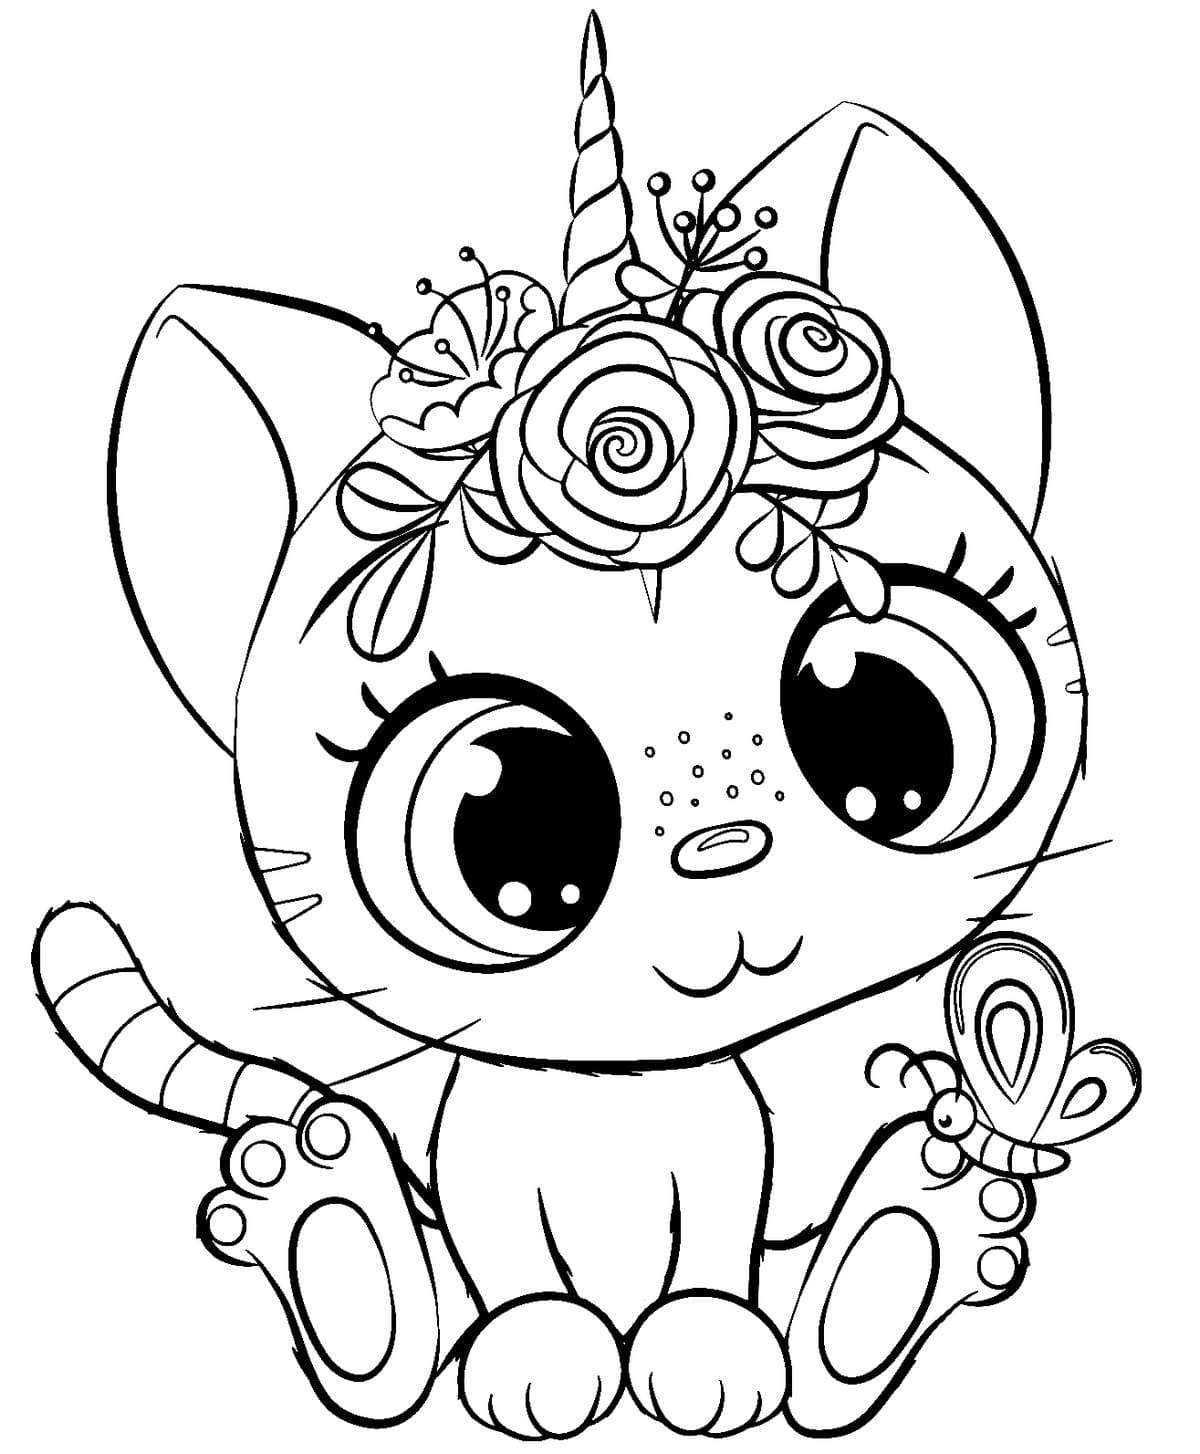 Coloring page Unicorn Cat and a butterfly